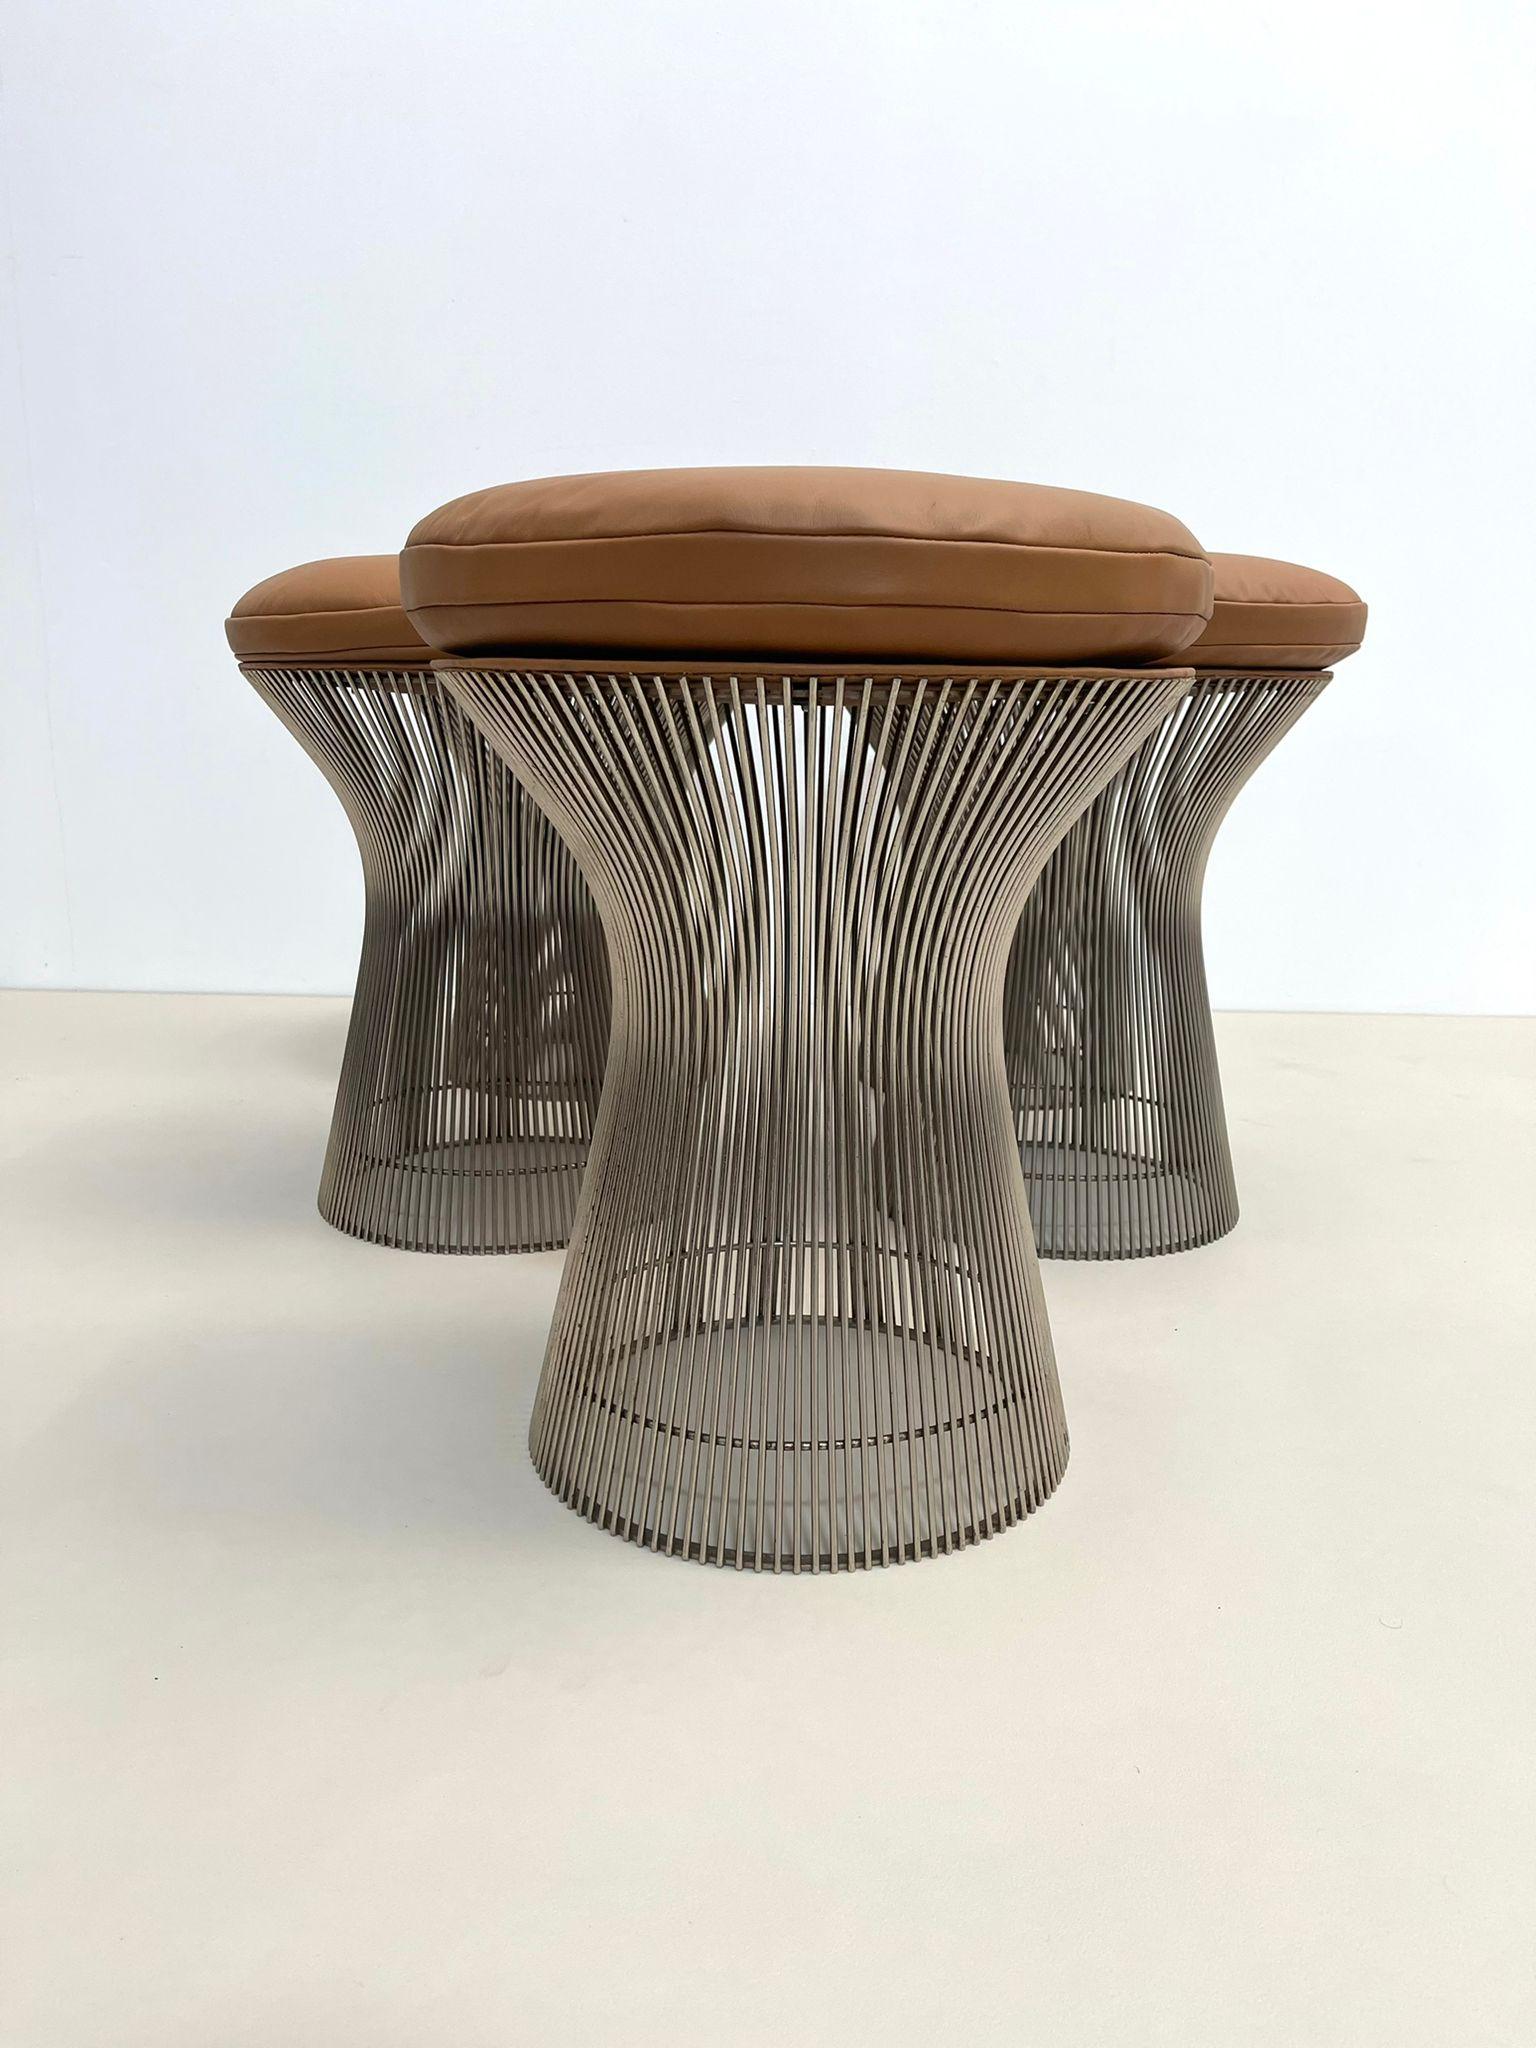 European Warren Platner Wire Stools for Knoll, 1960s, 5 Available For Sale